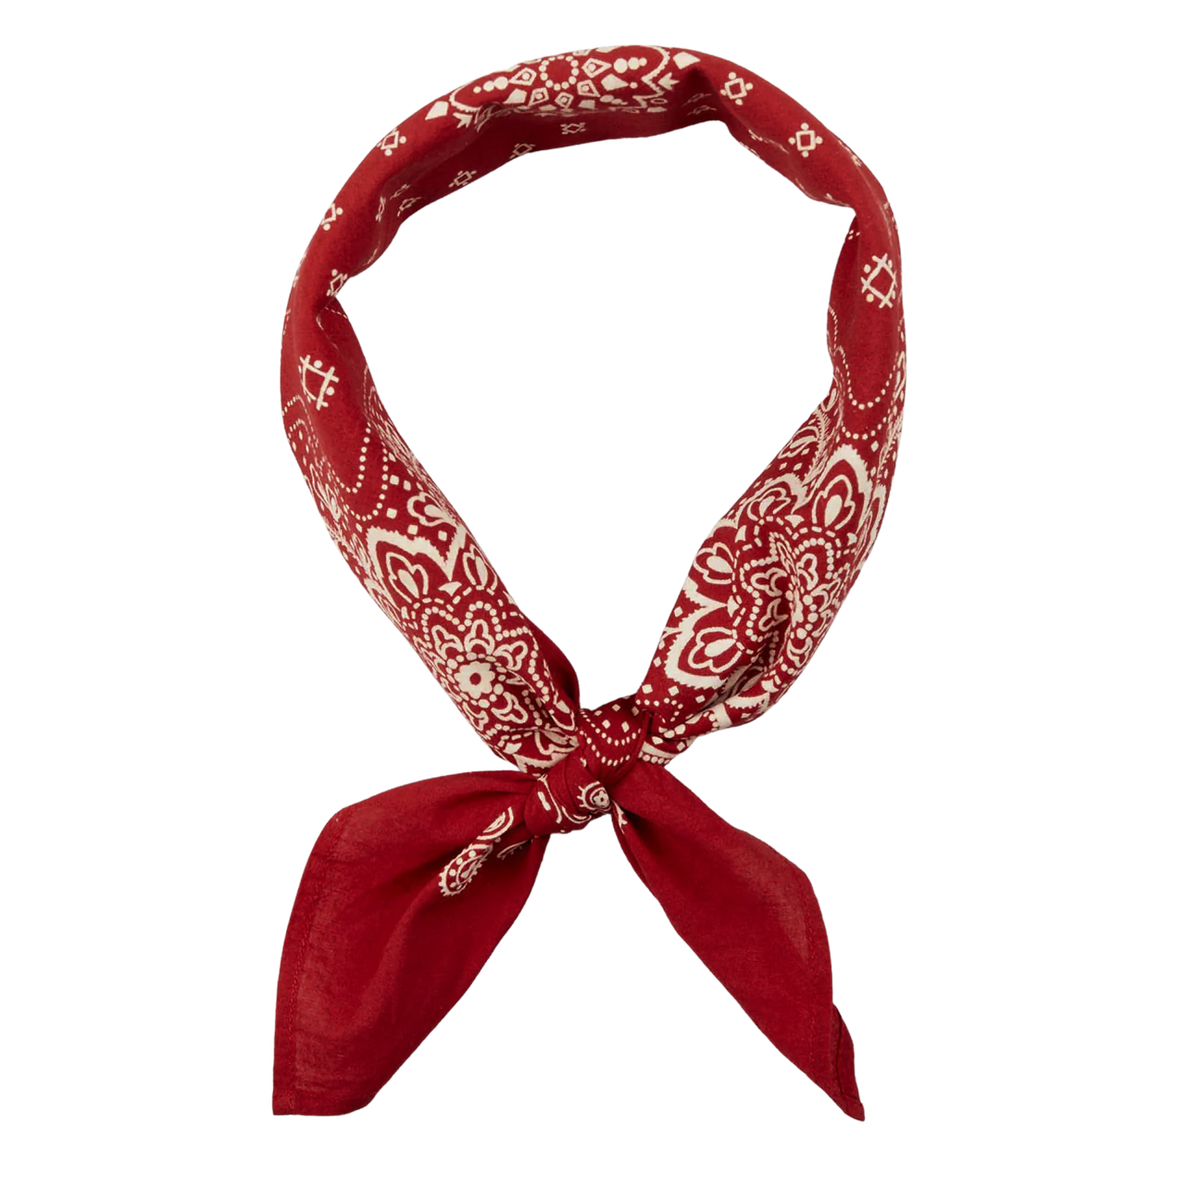 A Universal Works solid red cotton paisley printed bandana tied in a knot against a striped background.